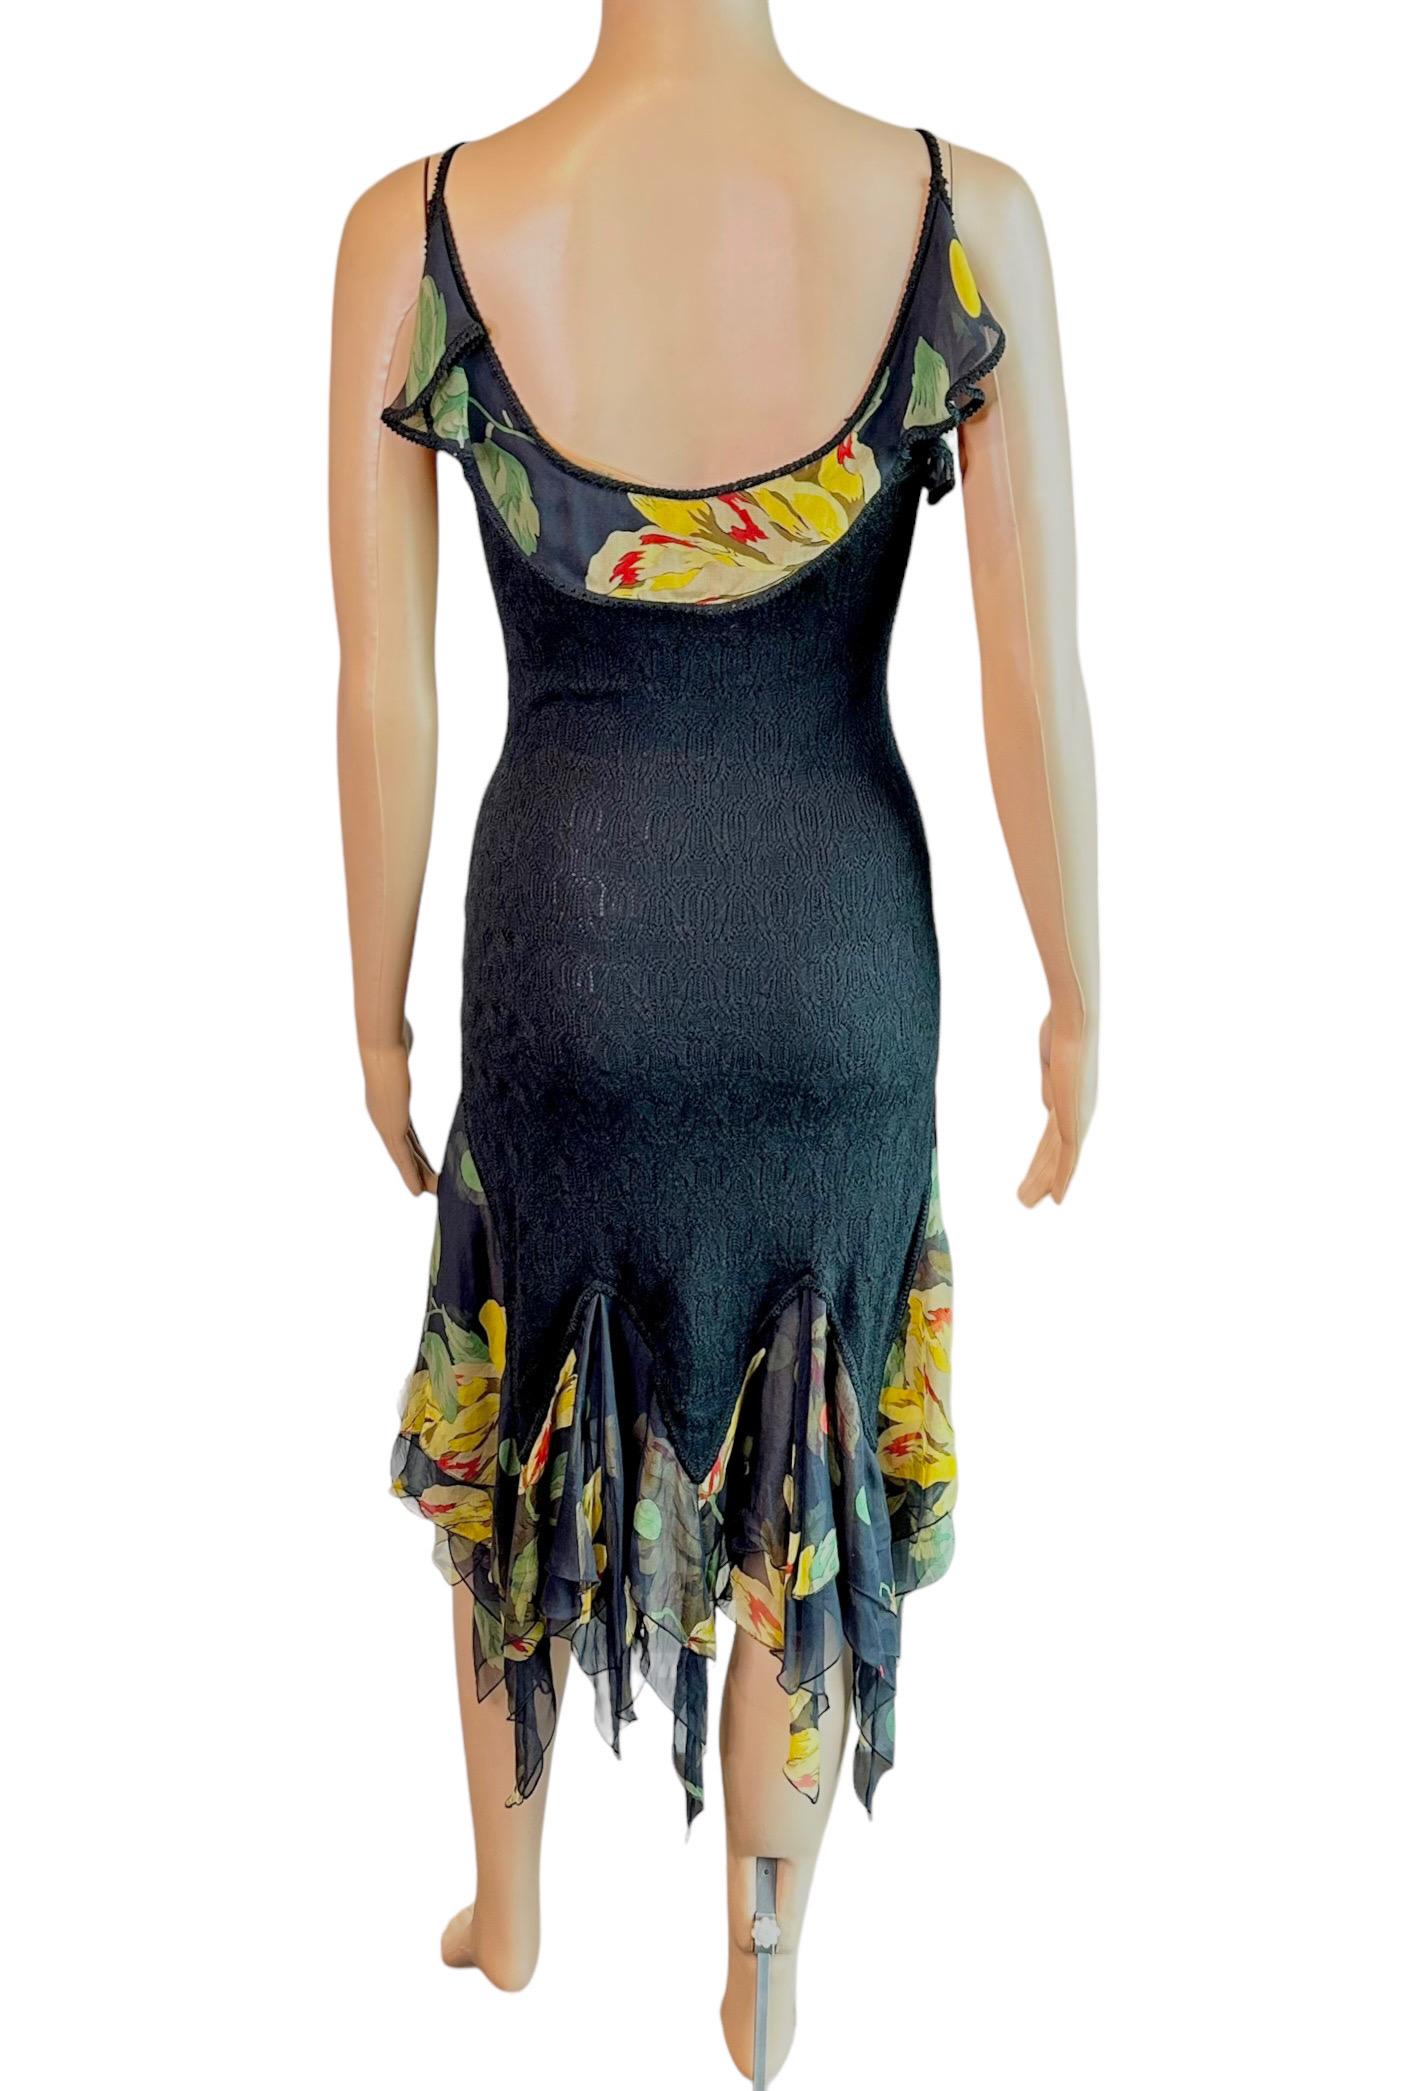 John Galliano S/S 2004 Sheer Lace Open Knit Floral Print Silk Ruffles Midi Dress In Good Condition For Sale In Naples, FL